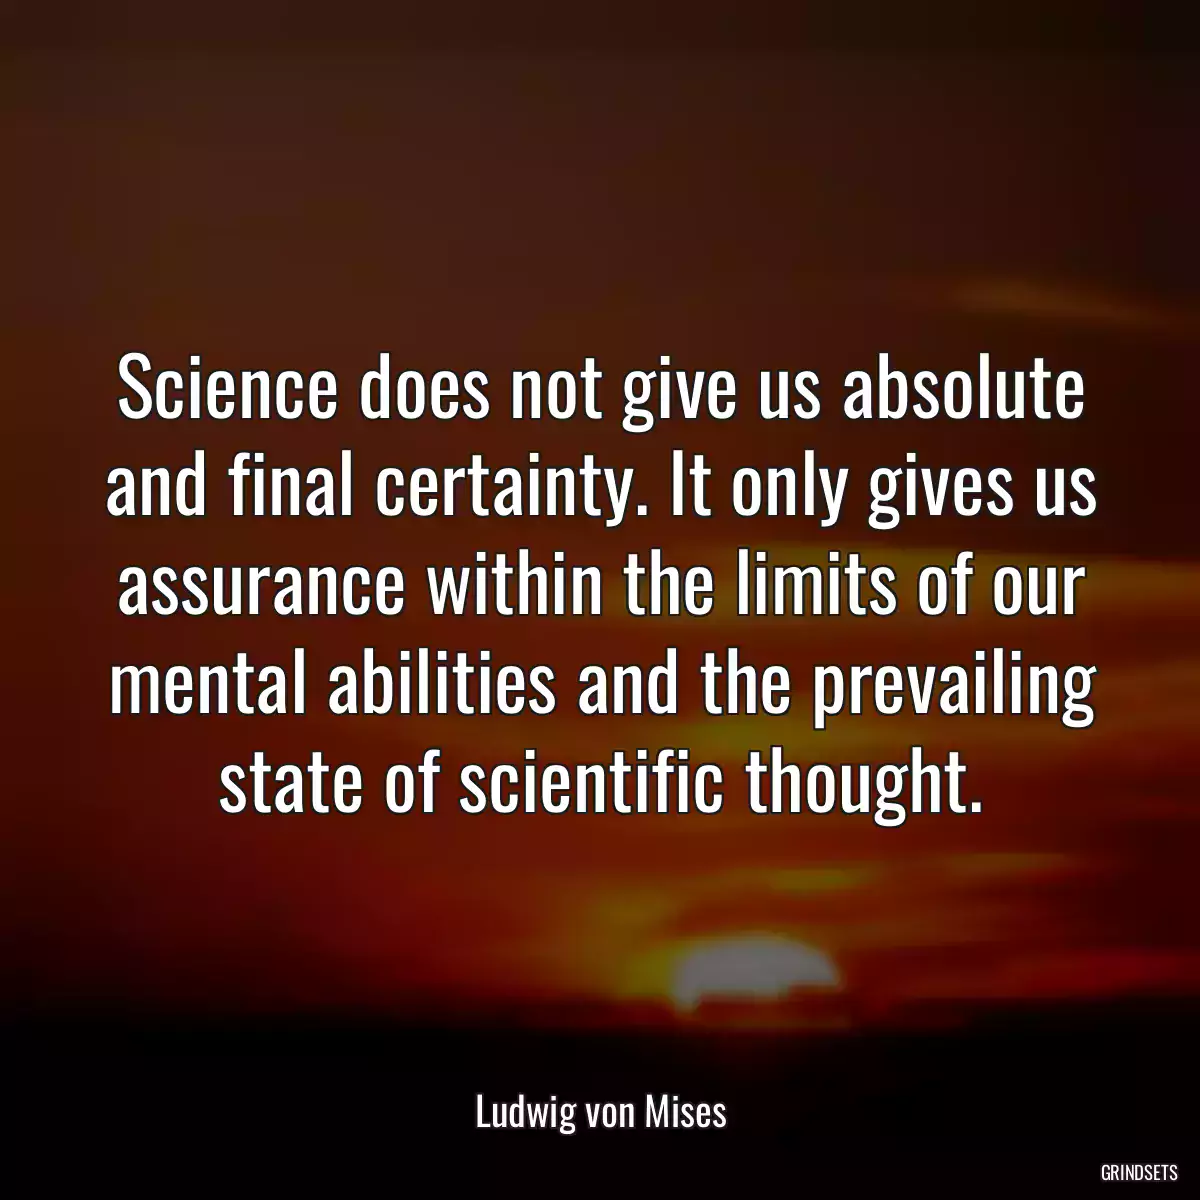 Science does not give us absolute and final certainty. It only gives us assurance within the limits of our mental abilities and the prevailing state of scientific thought.